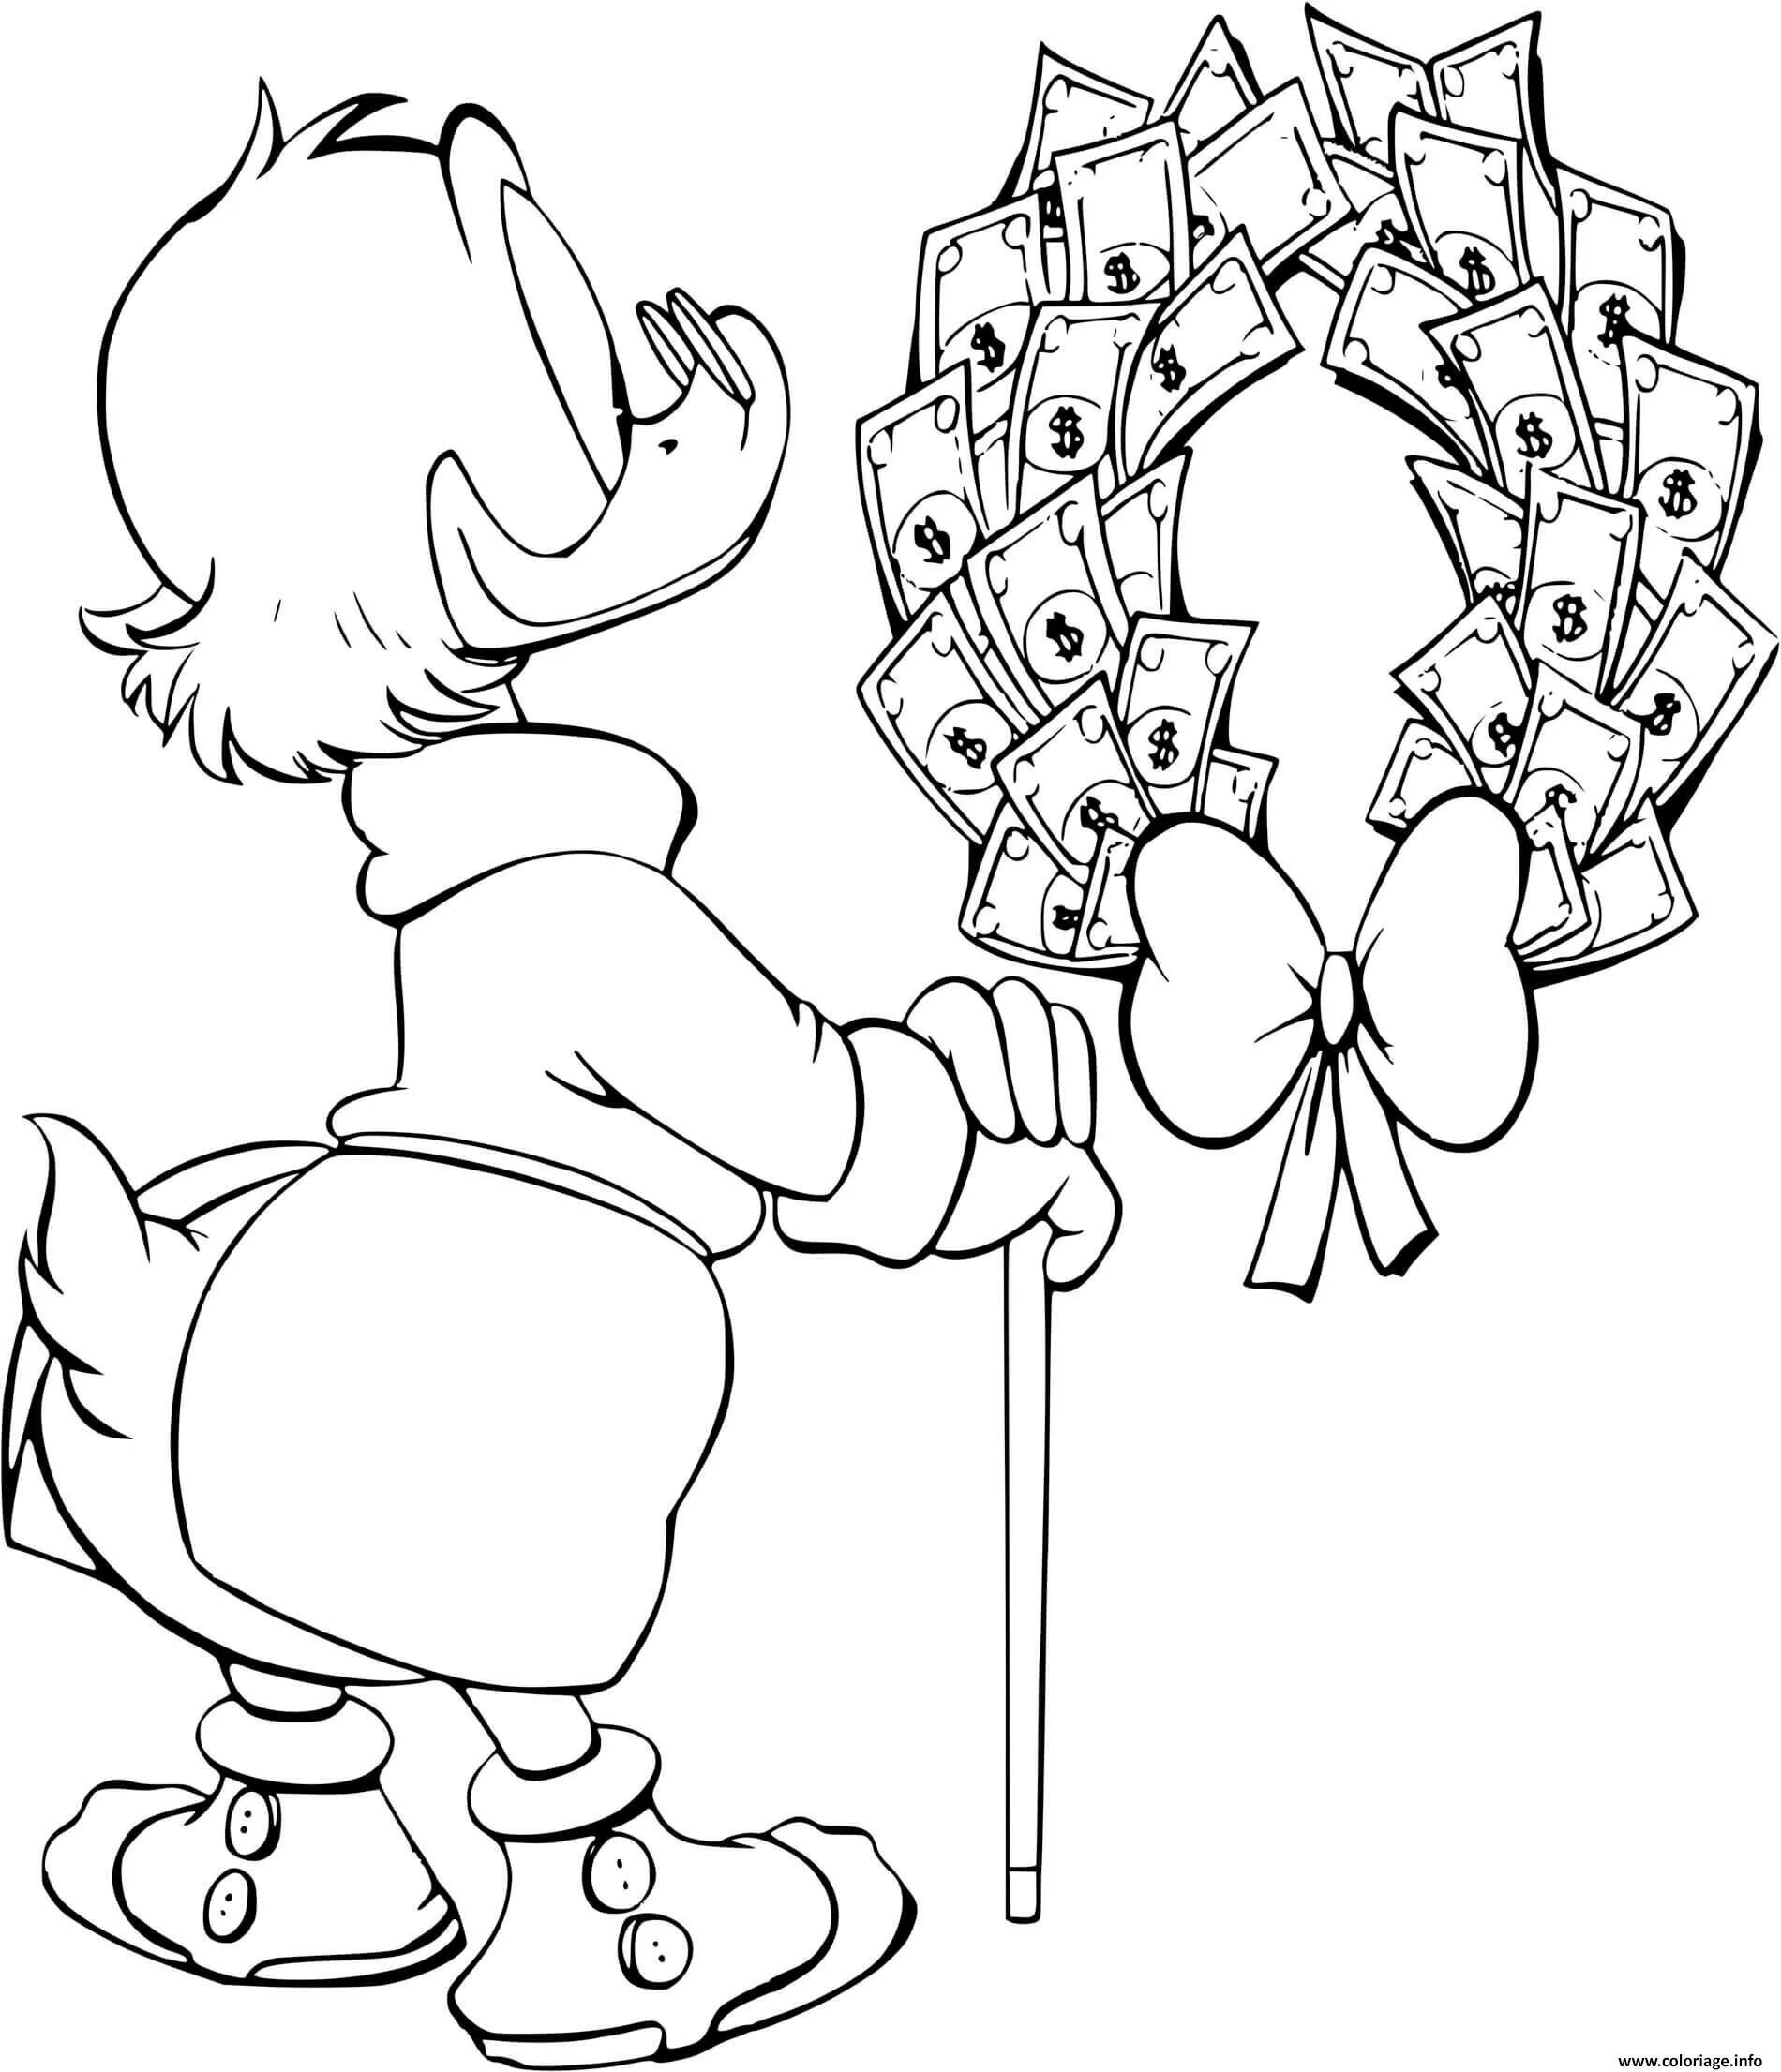 Sparkly scrooge mcduck coloring pages with money